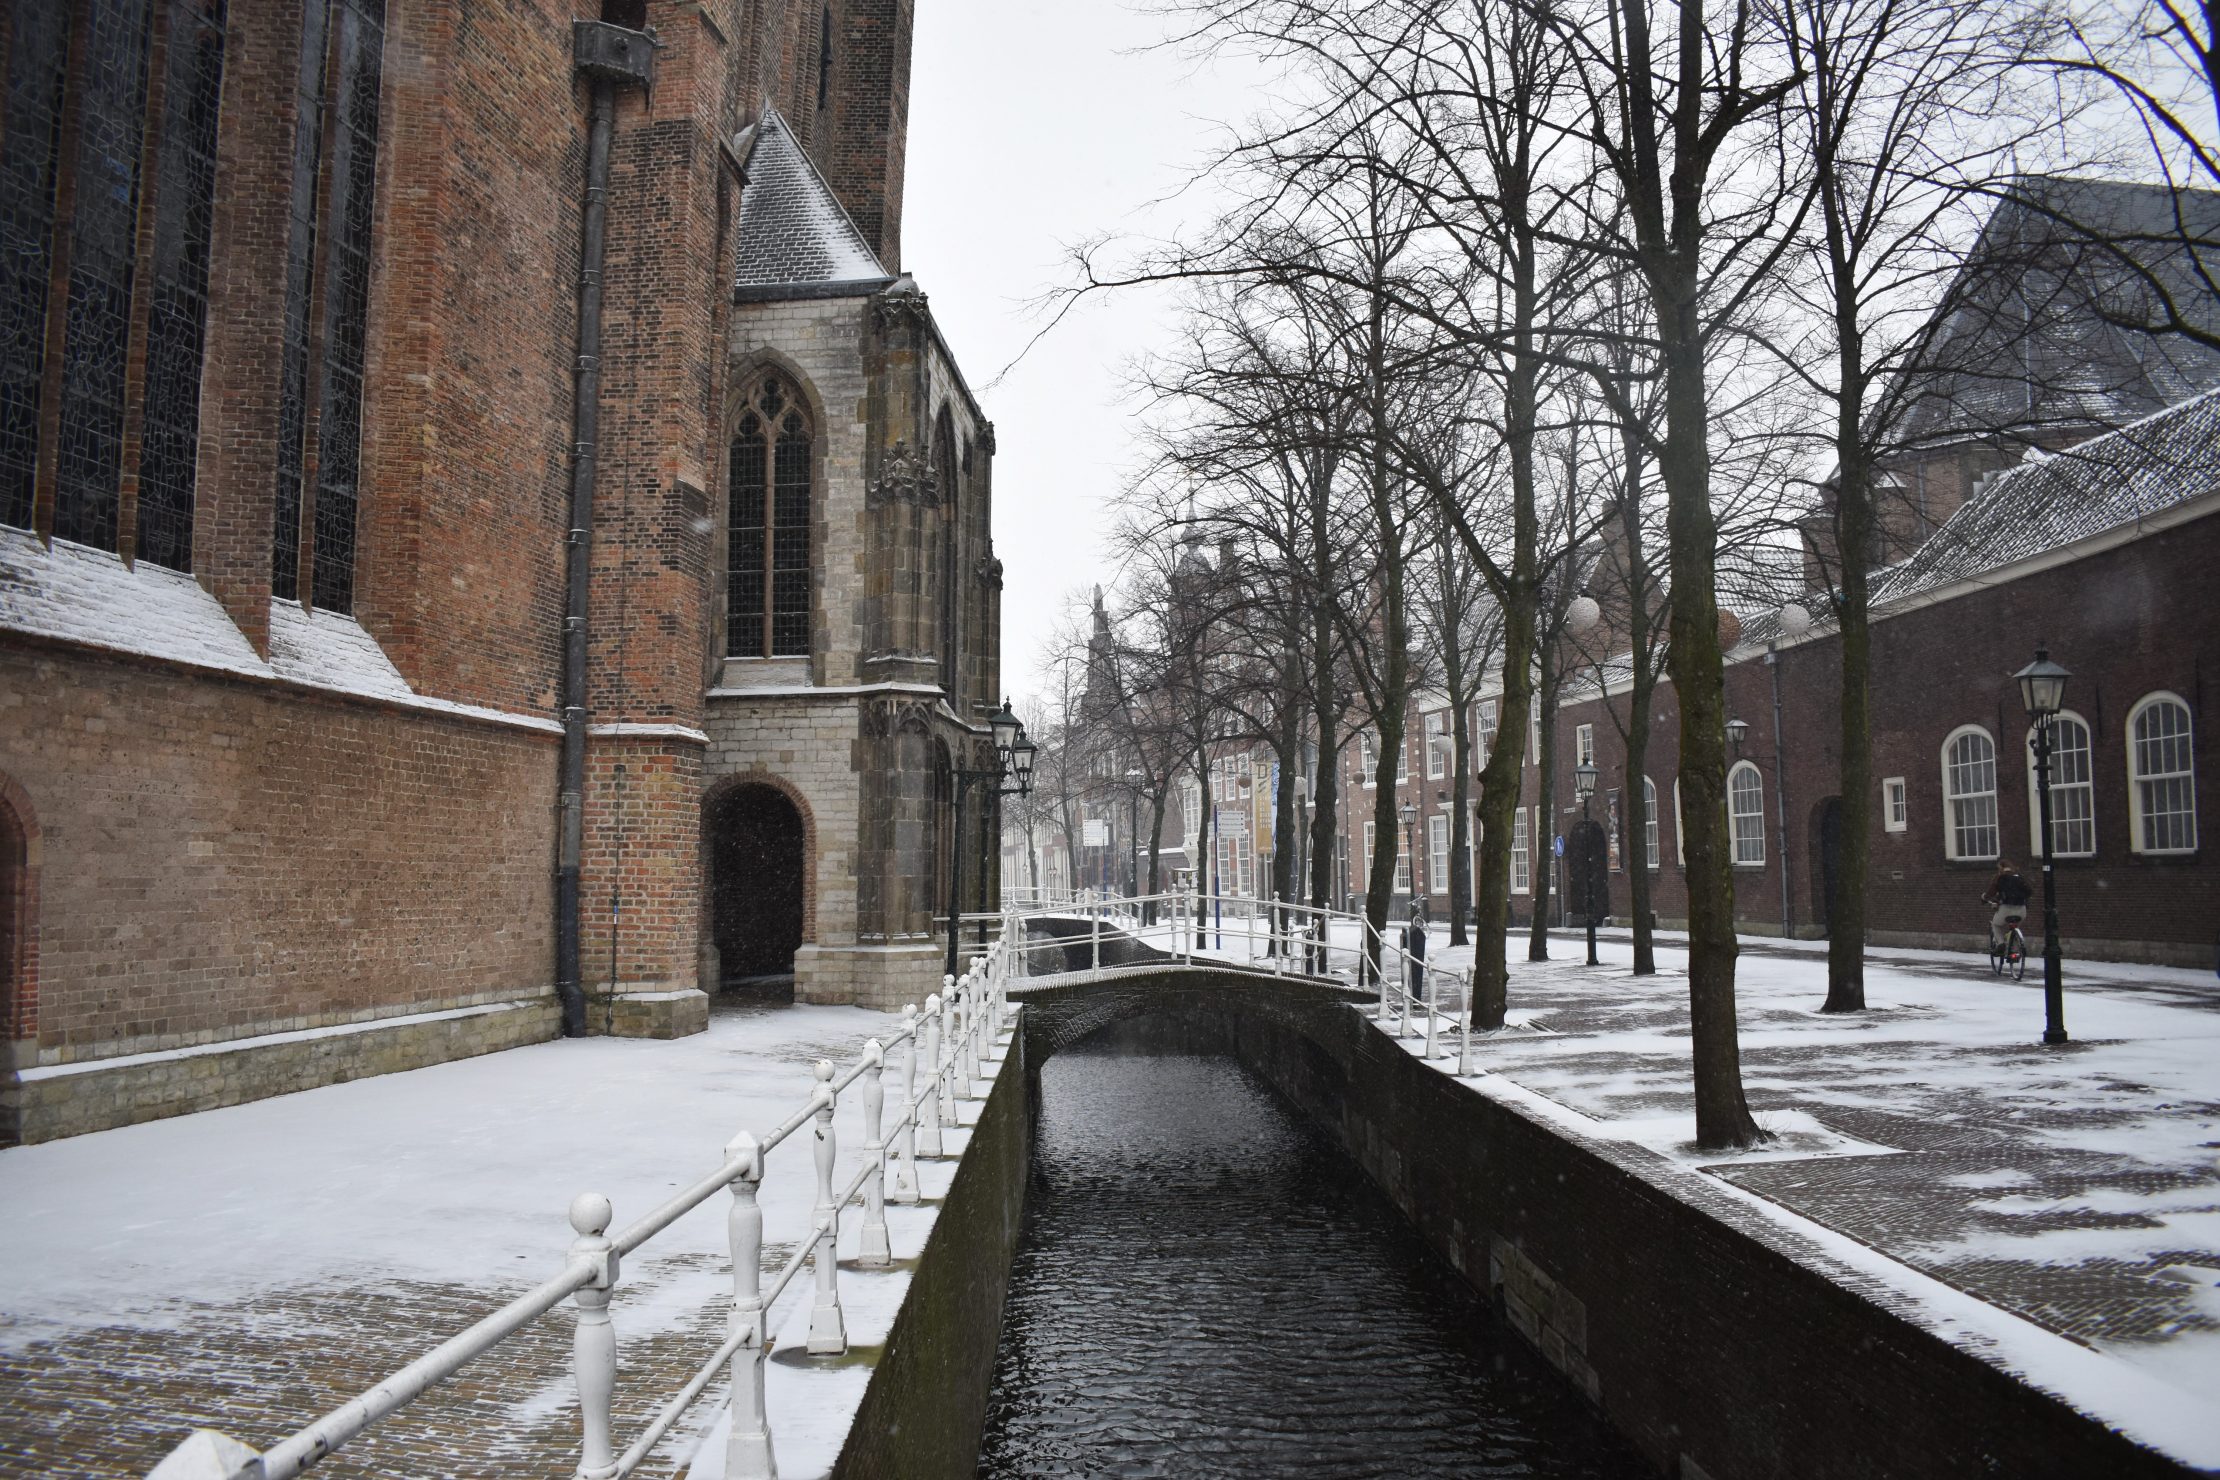 Delft Canals are starting to freeze